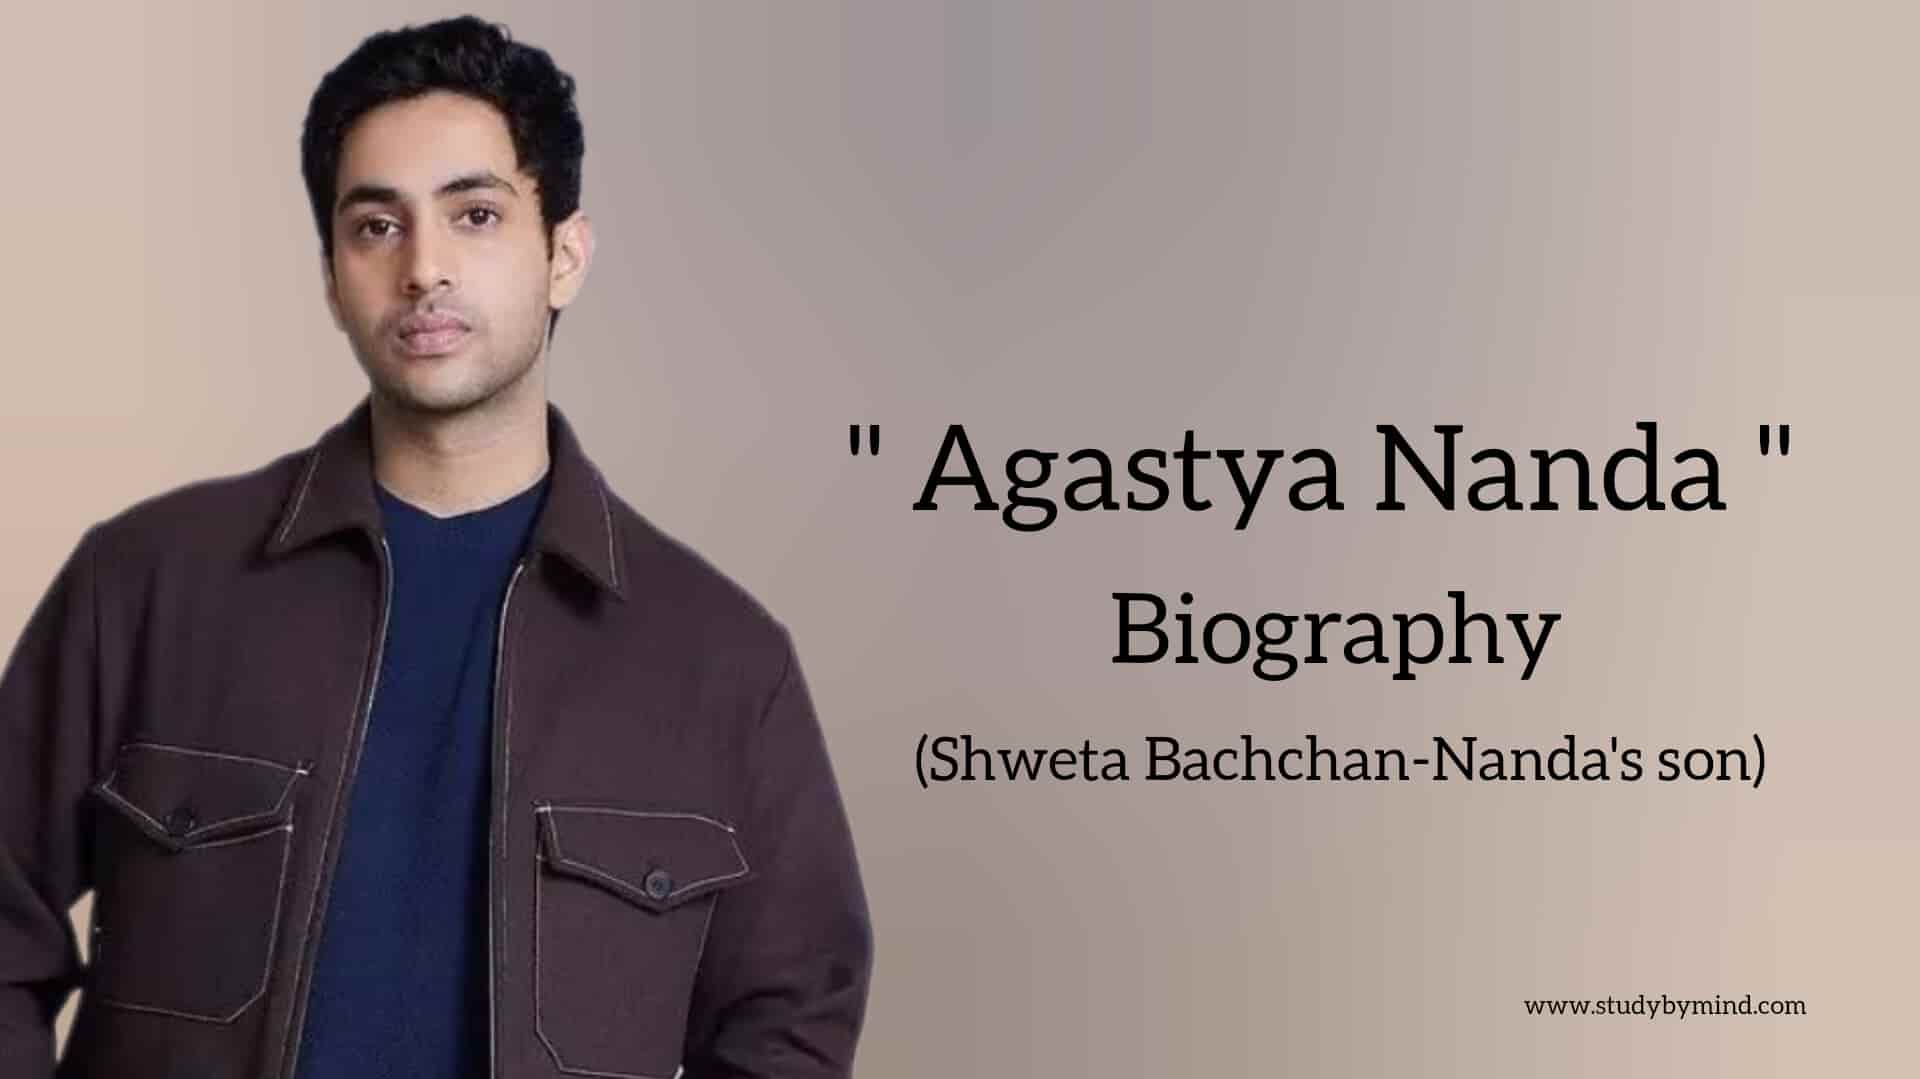 You are currently viewing Agastya nanda biography in english (Indian Actor)